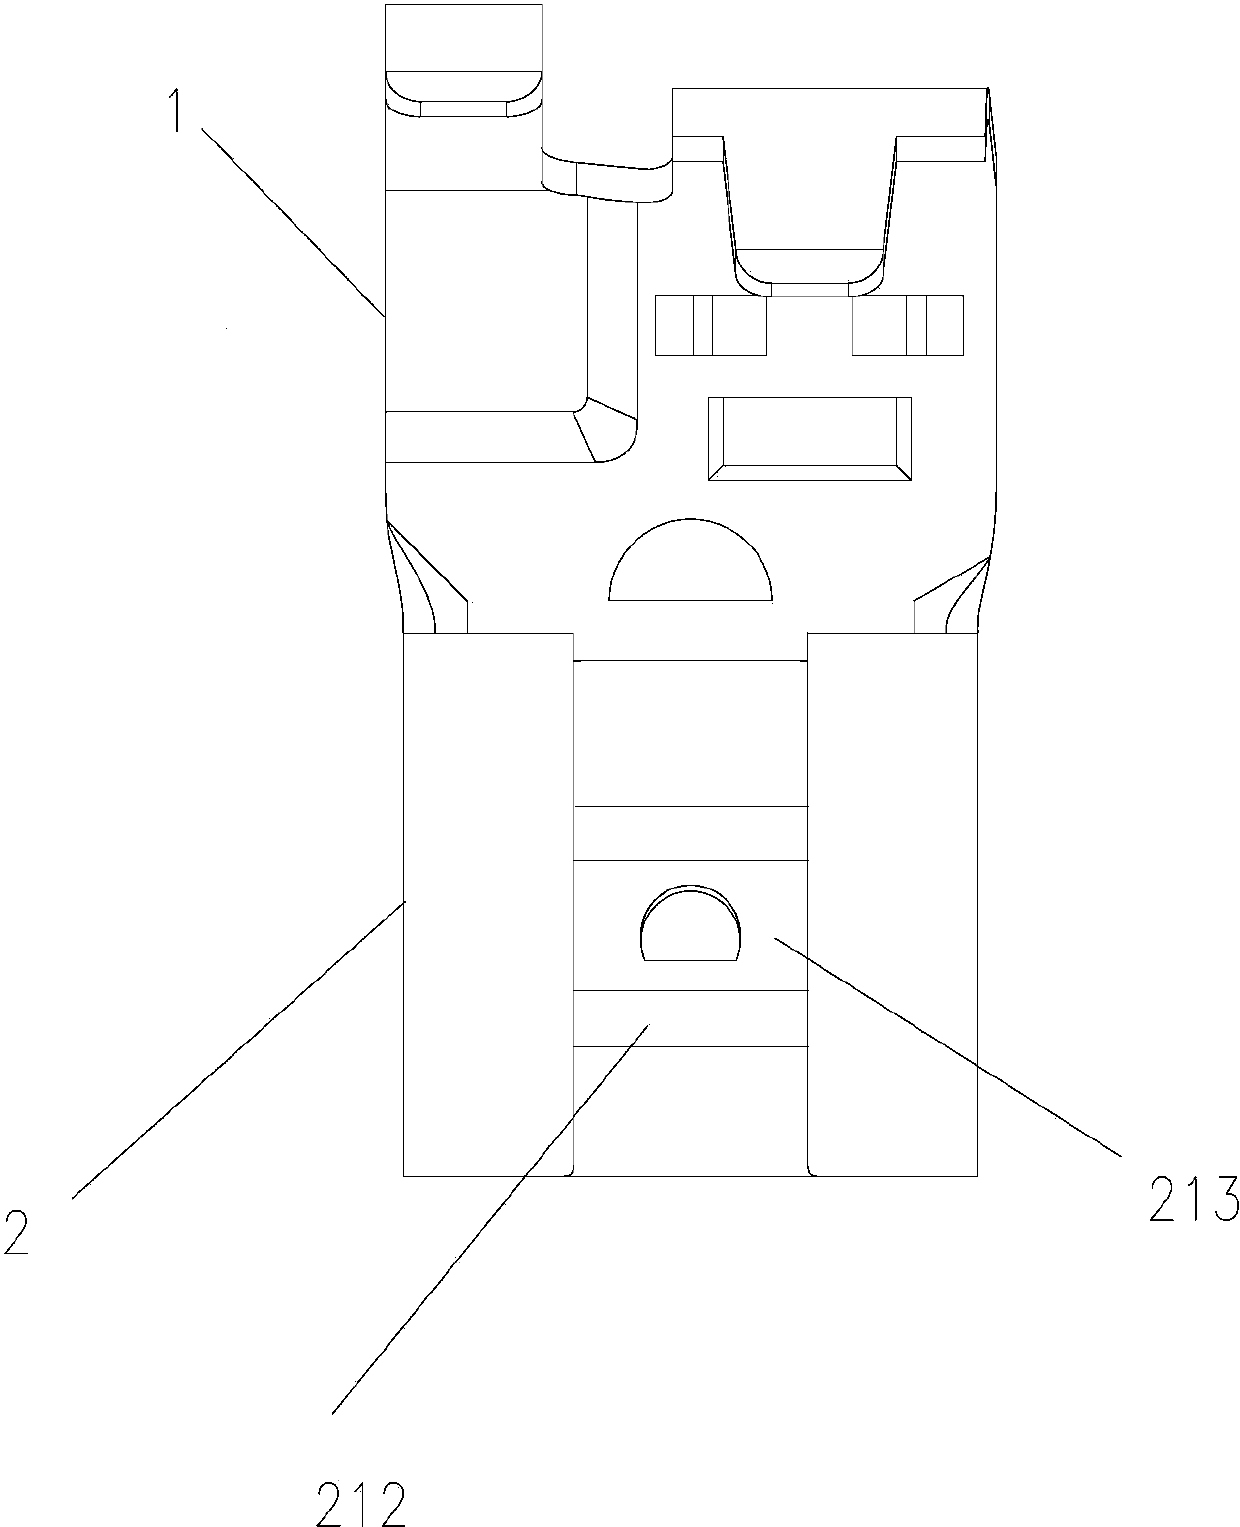 Flag-shaped terminal with low inserting force and high extracting force